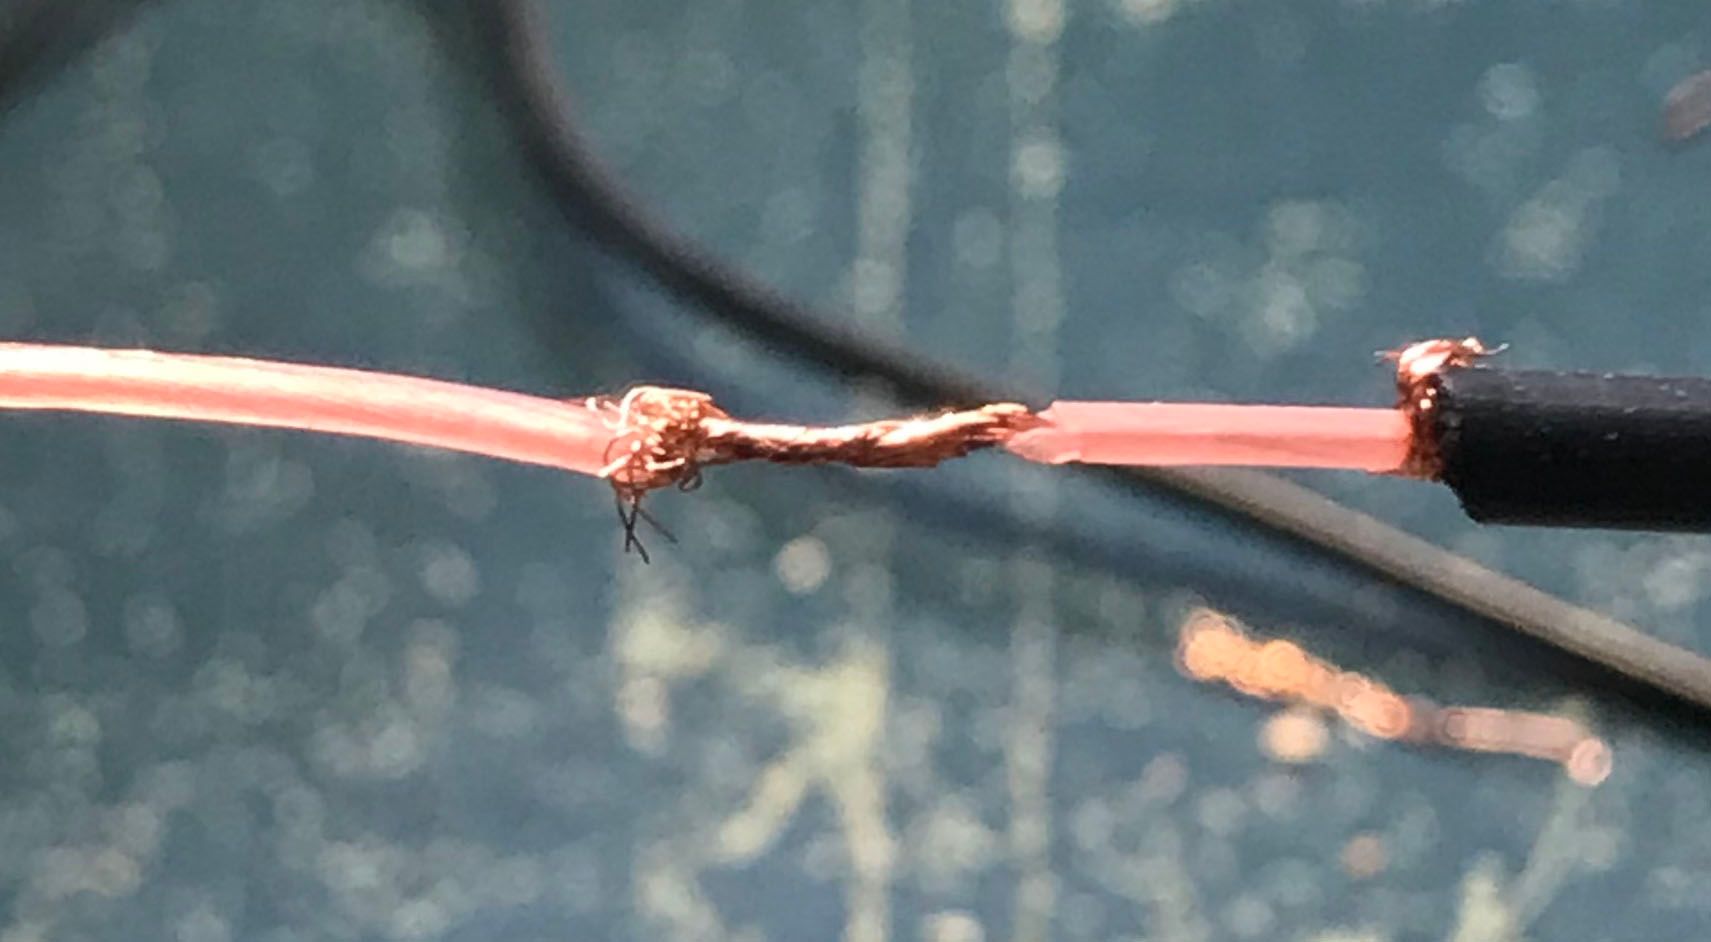 A twisted pair of wires